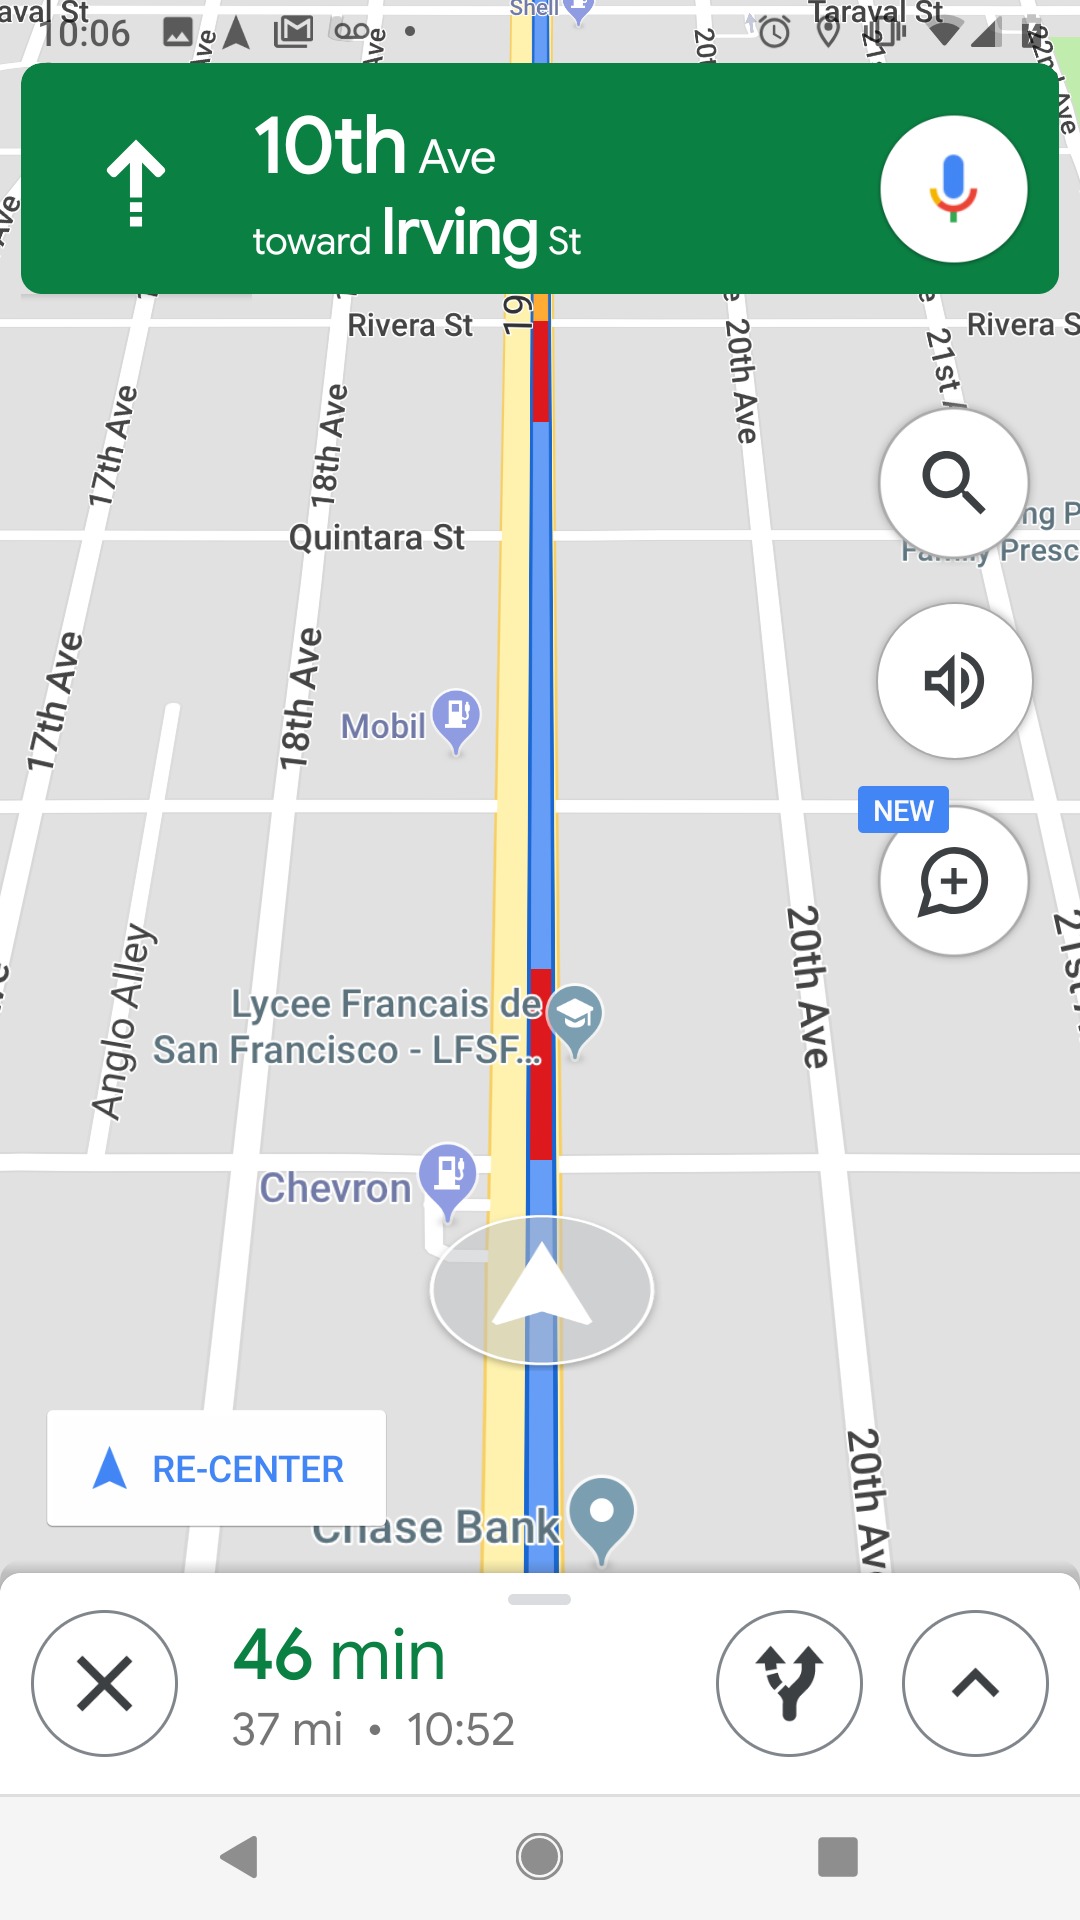 This Is the NewGeneration Google Maps Navigation Experience